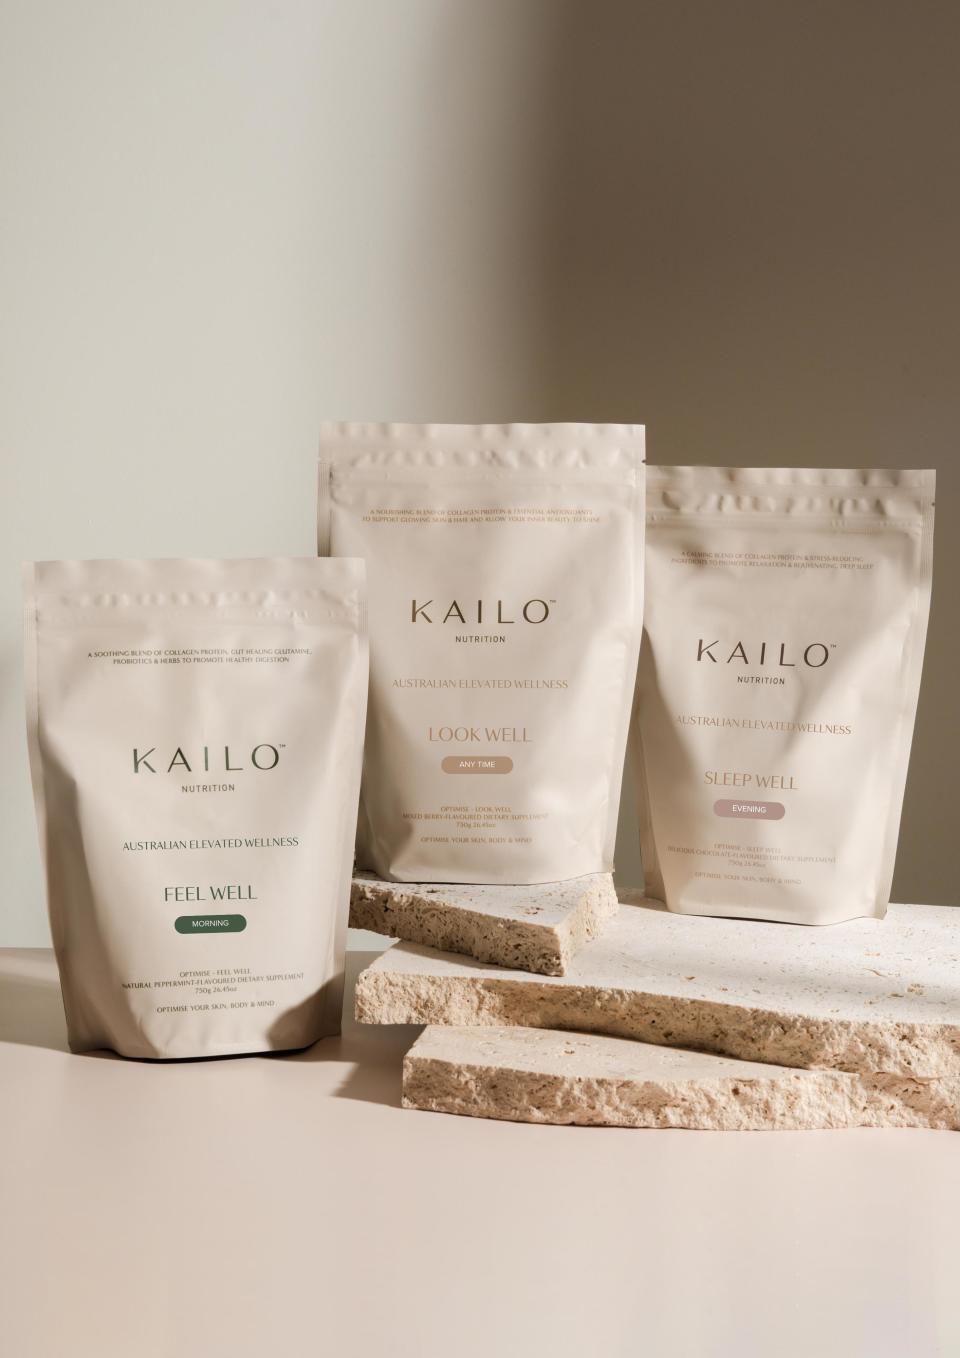 Kailo Nutrition products. 